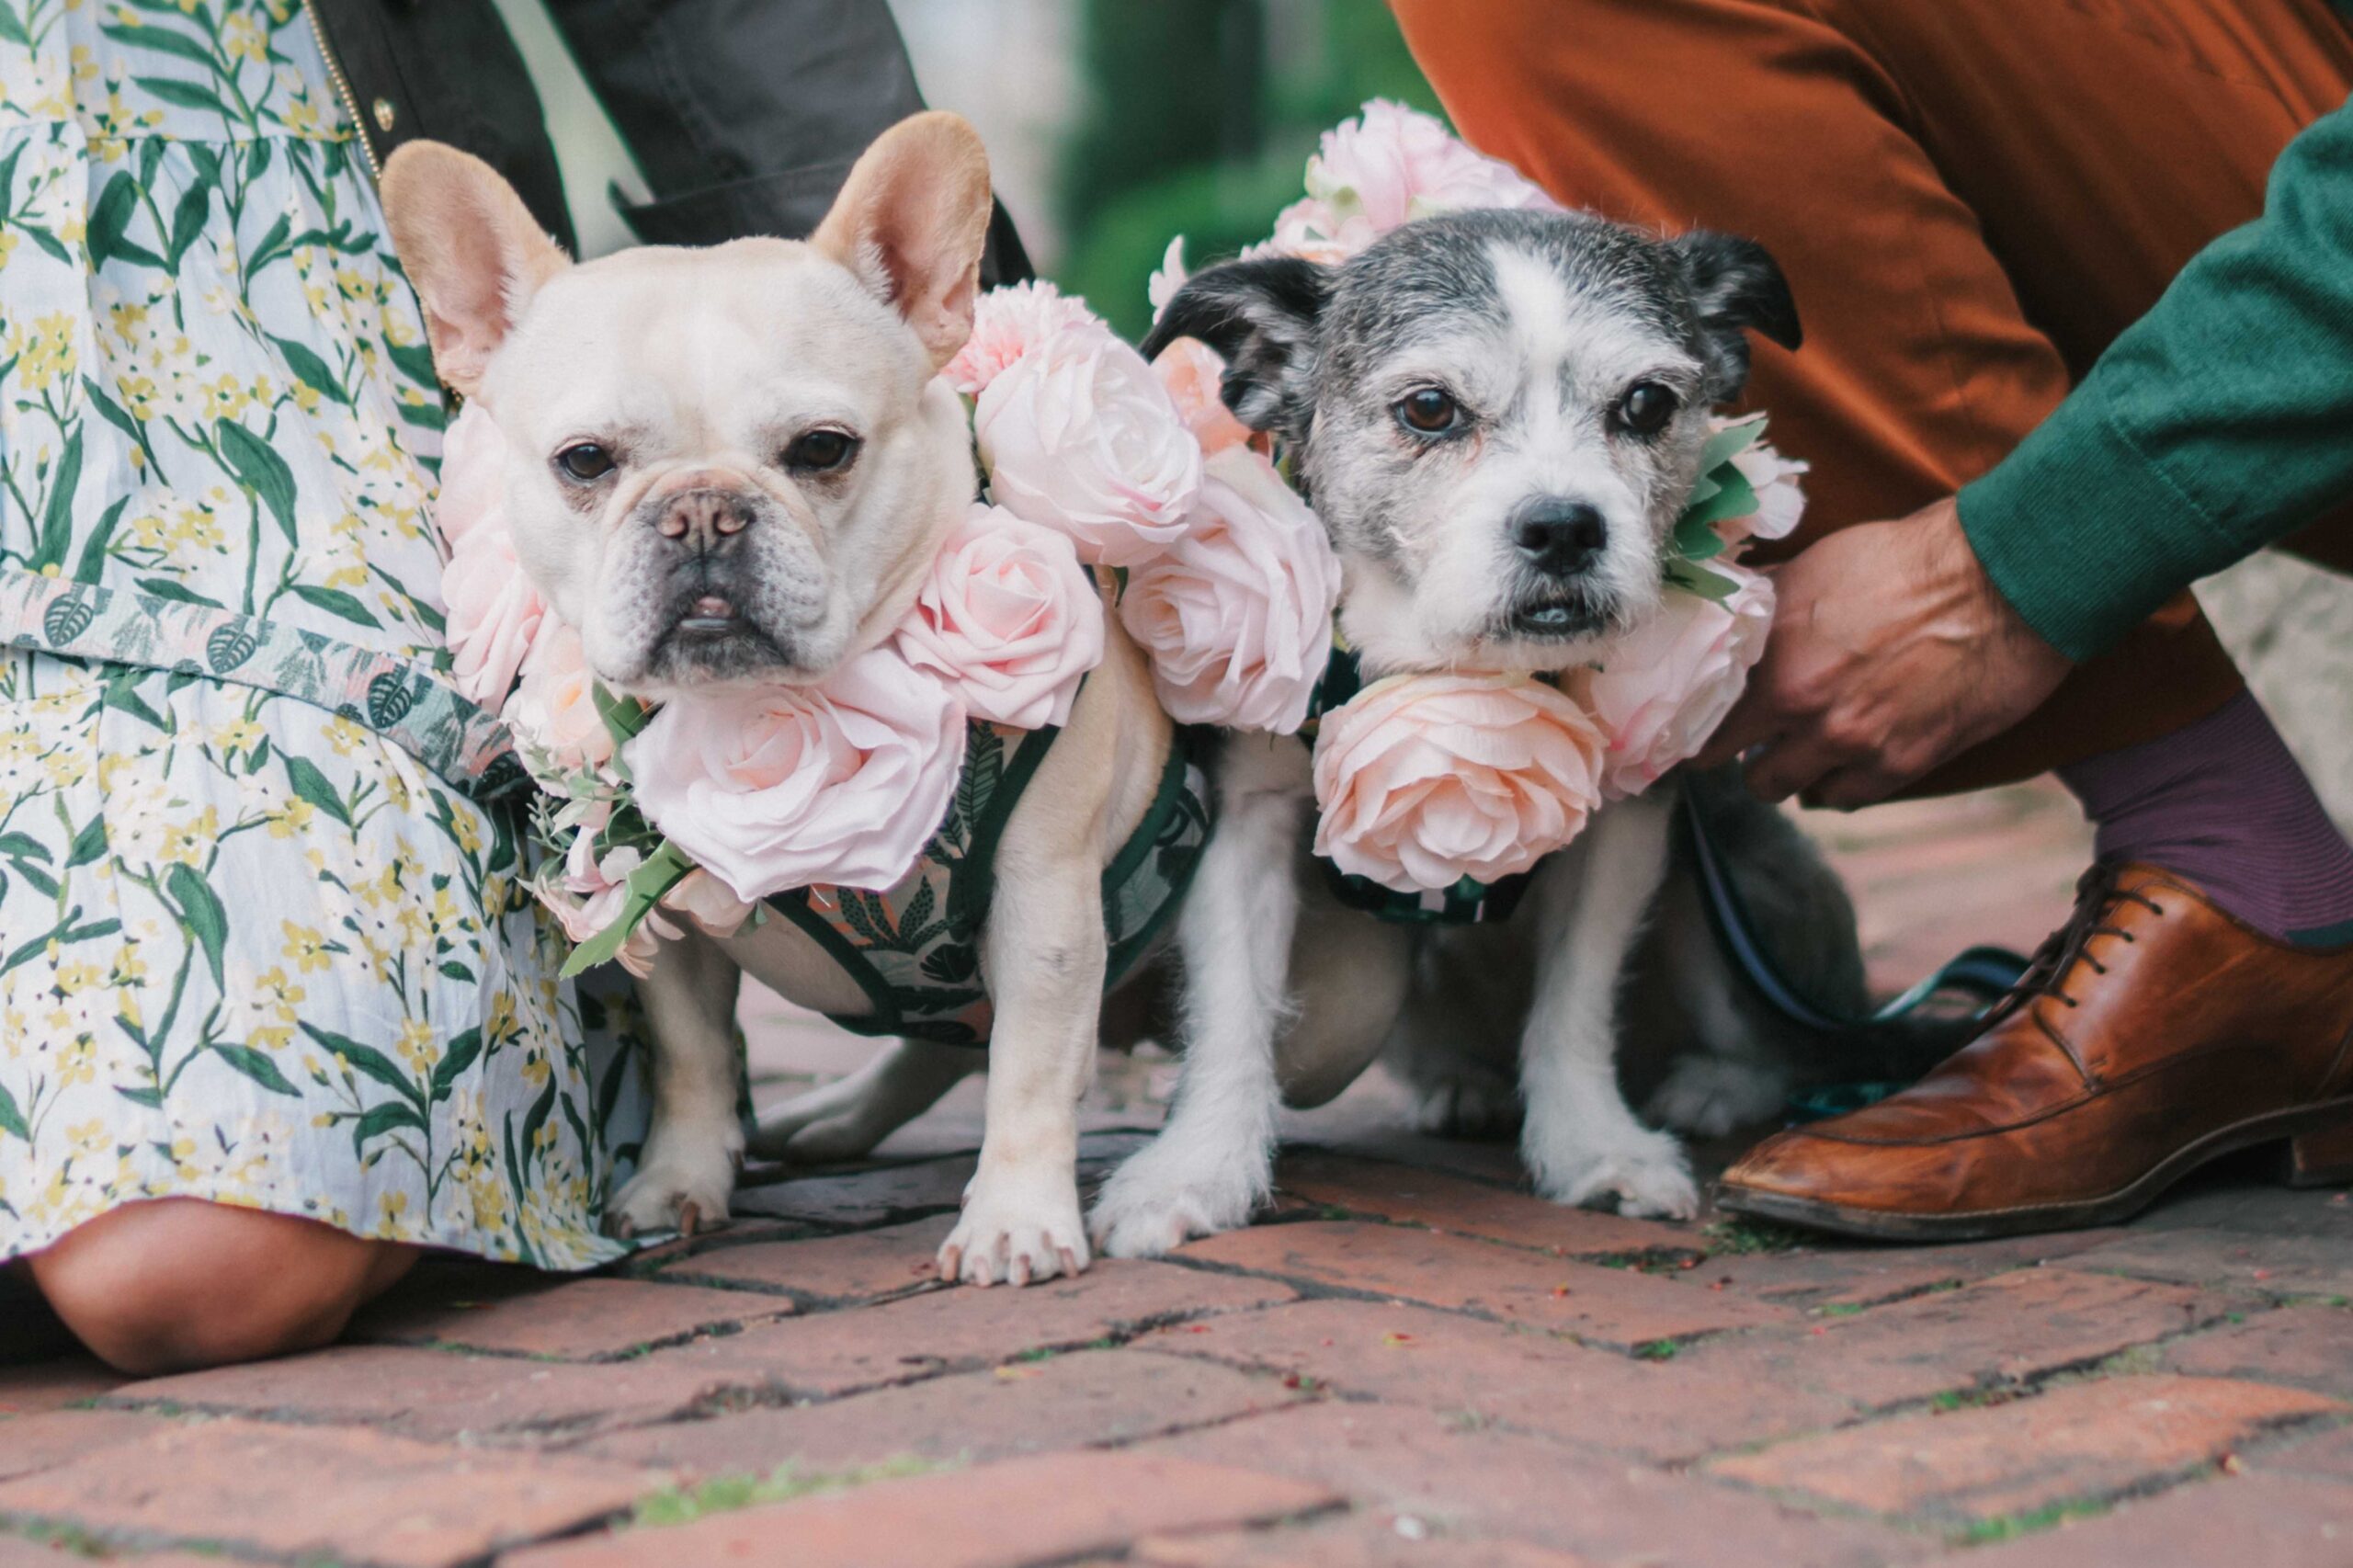 old town Alexandria engagement photo with two dogs and their flower rings